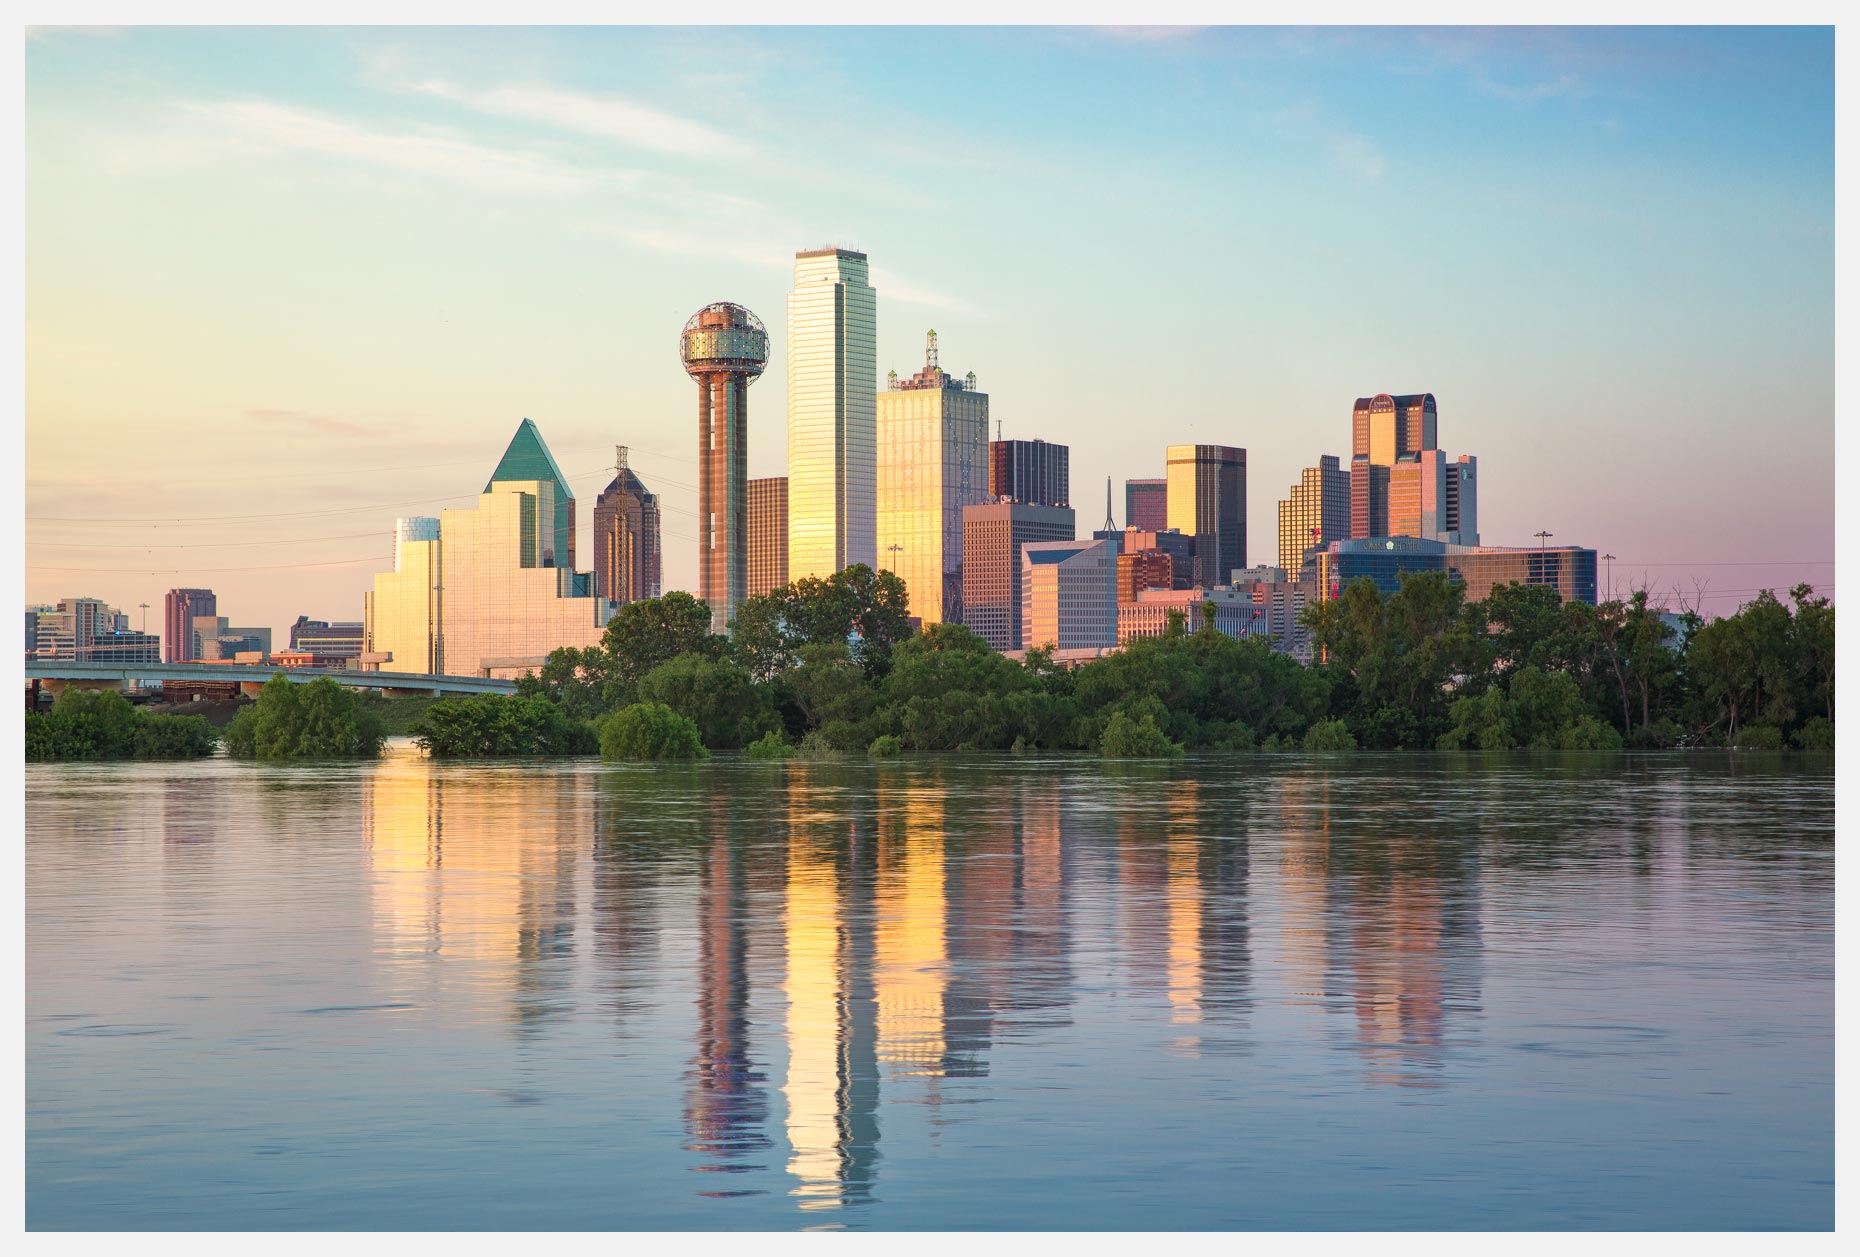 The Dallas Skyline at Sunset with reflections in water from the Trinity River